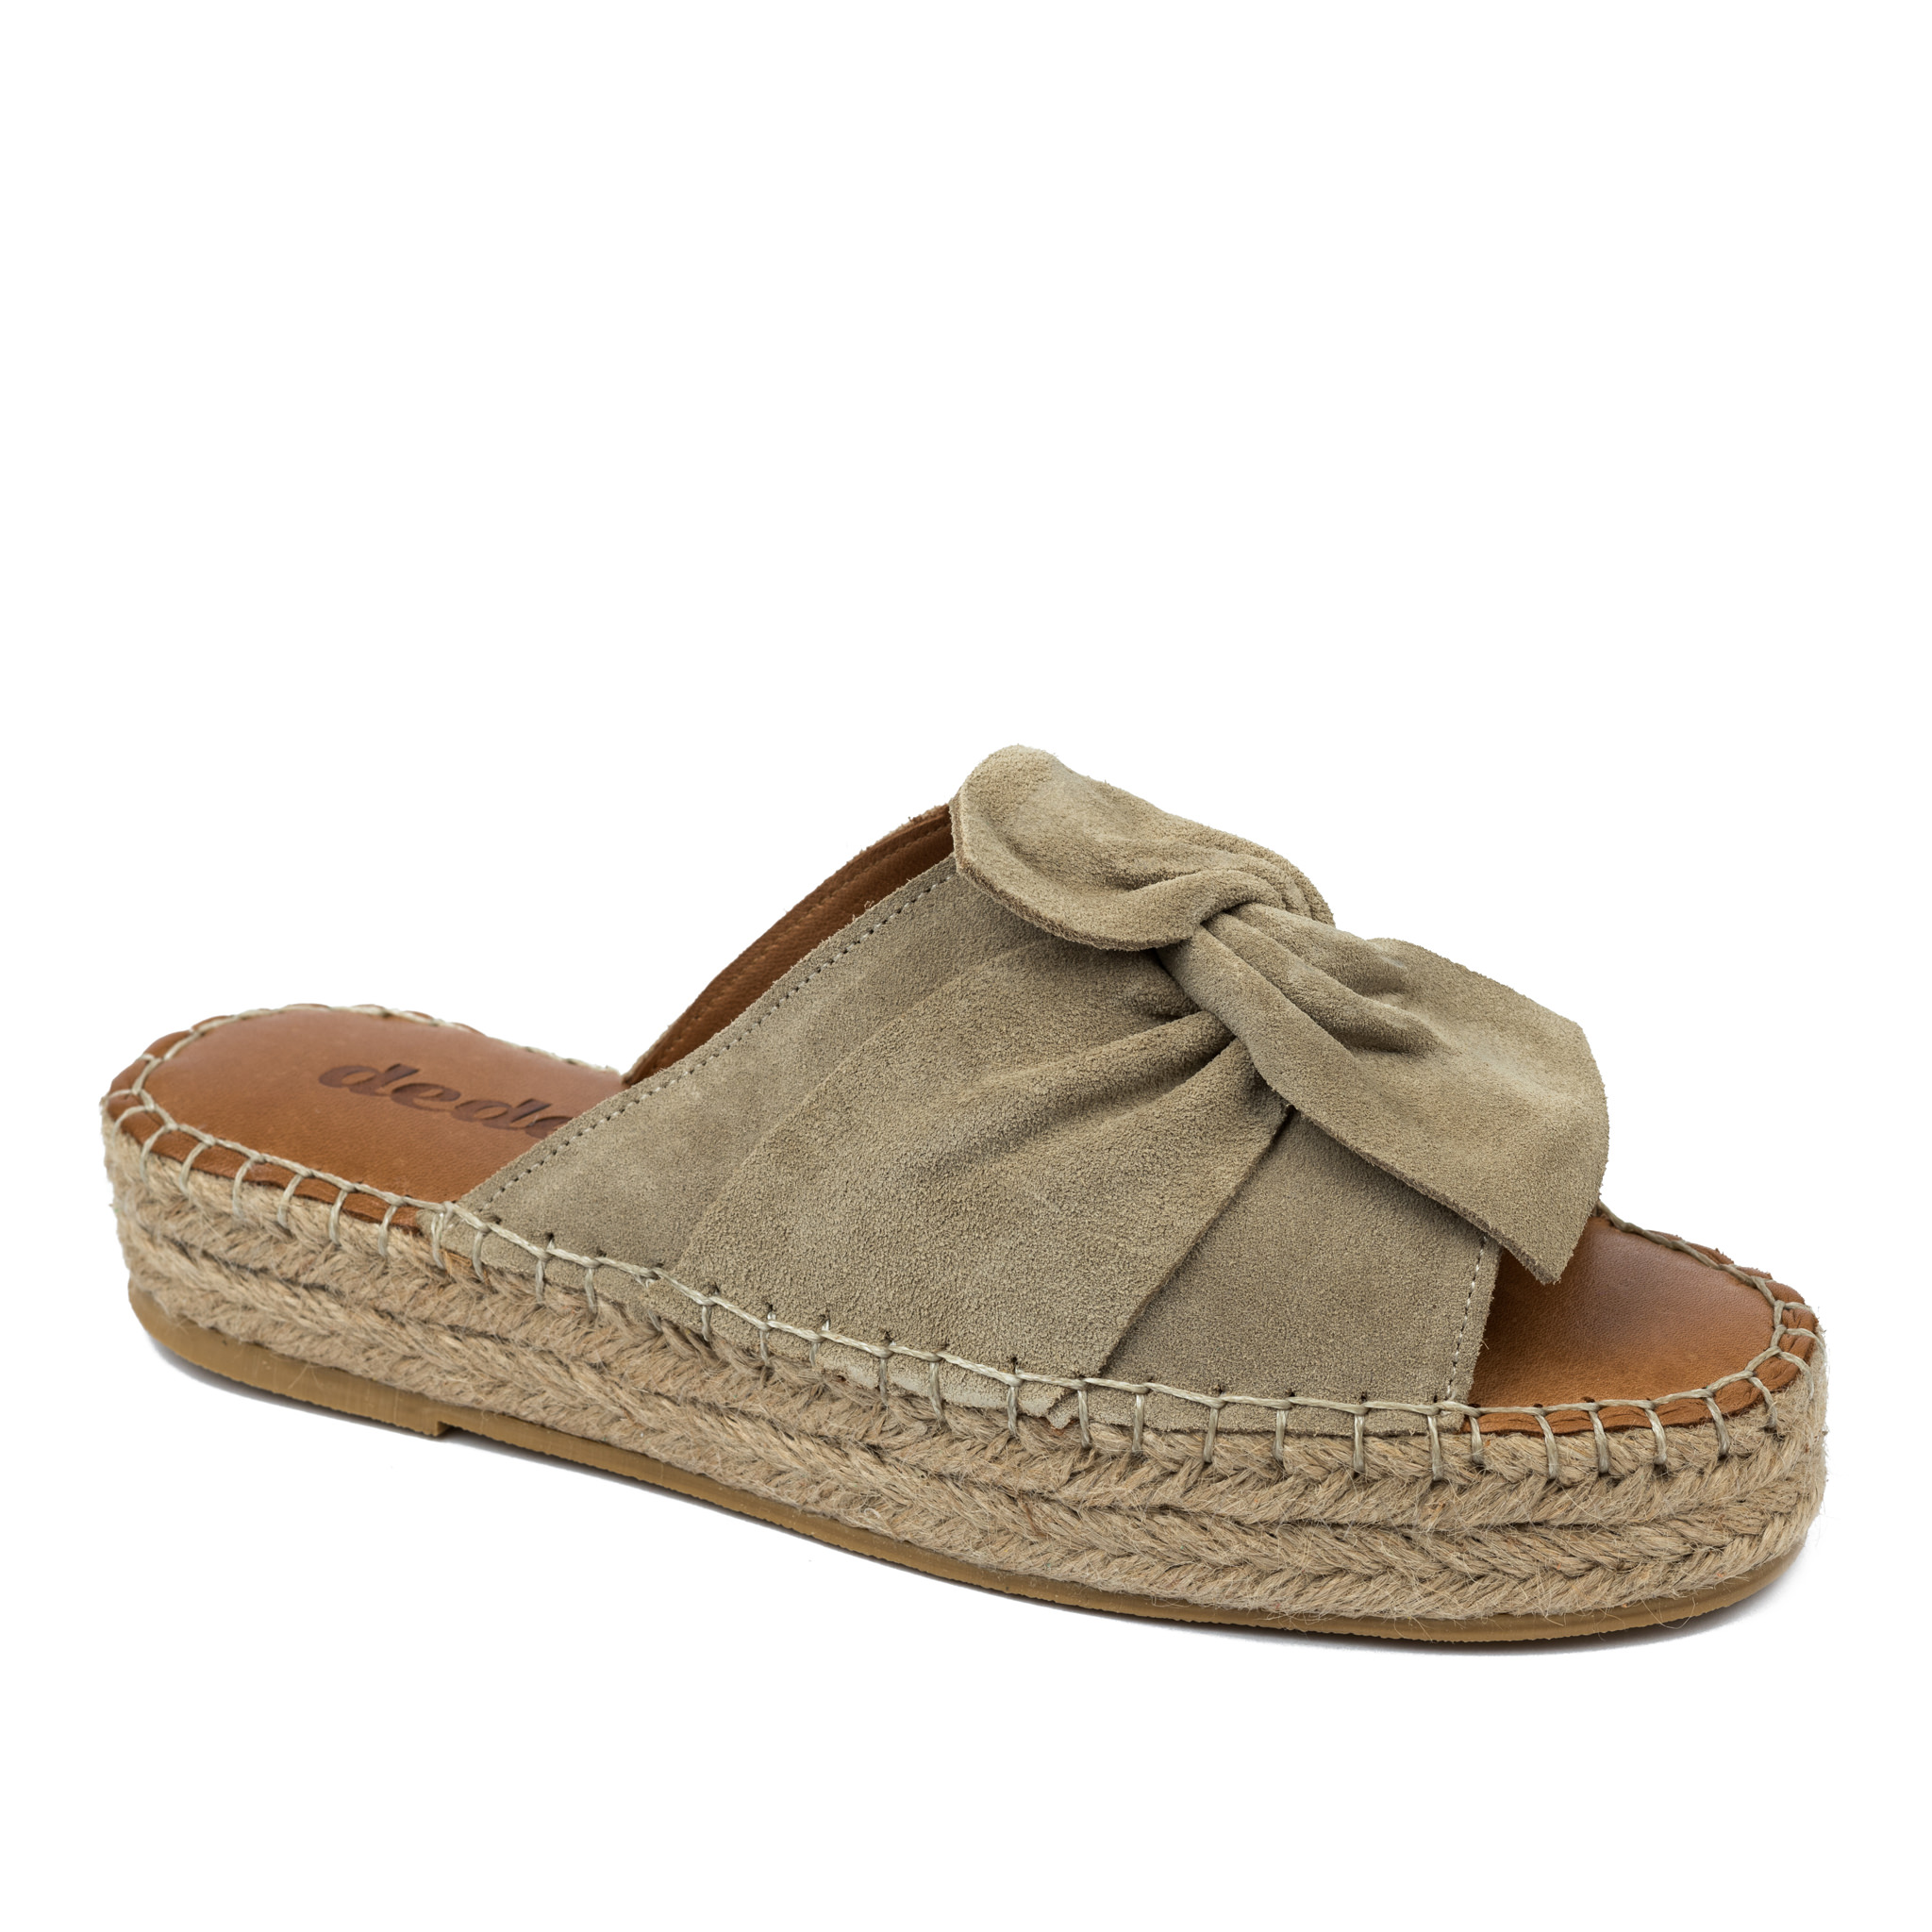 Leather slippers A658 - BEIGE